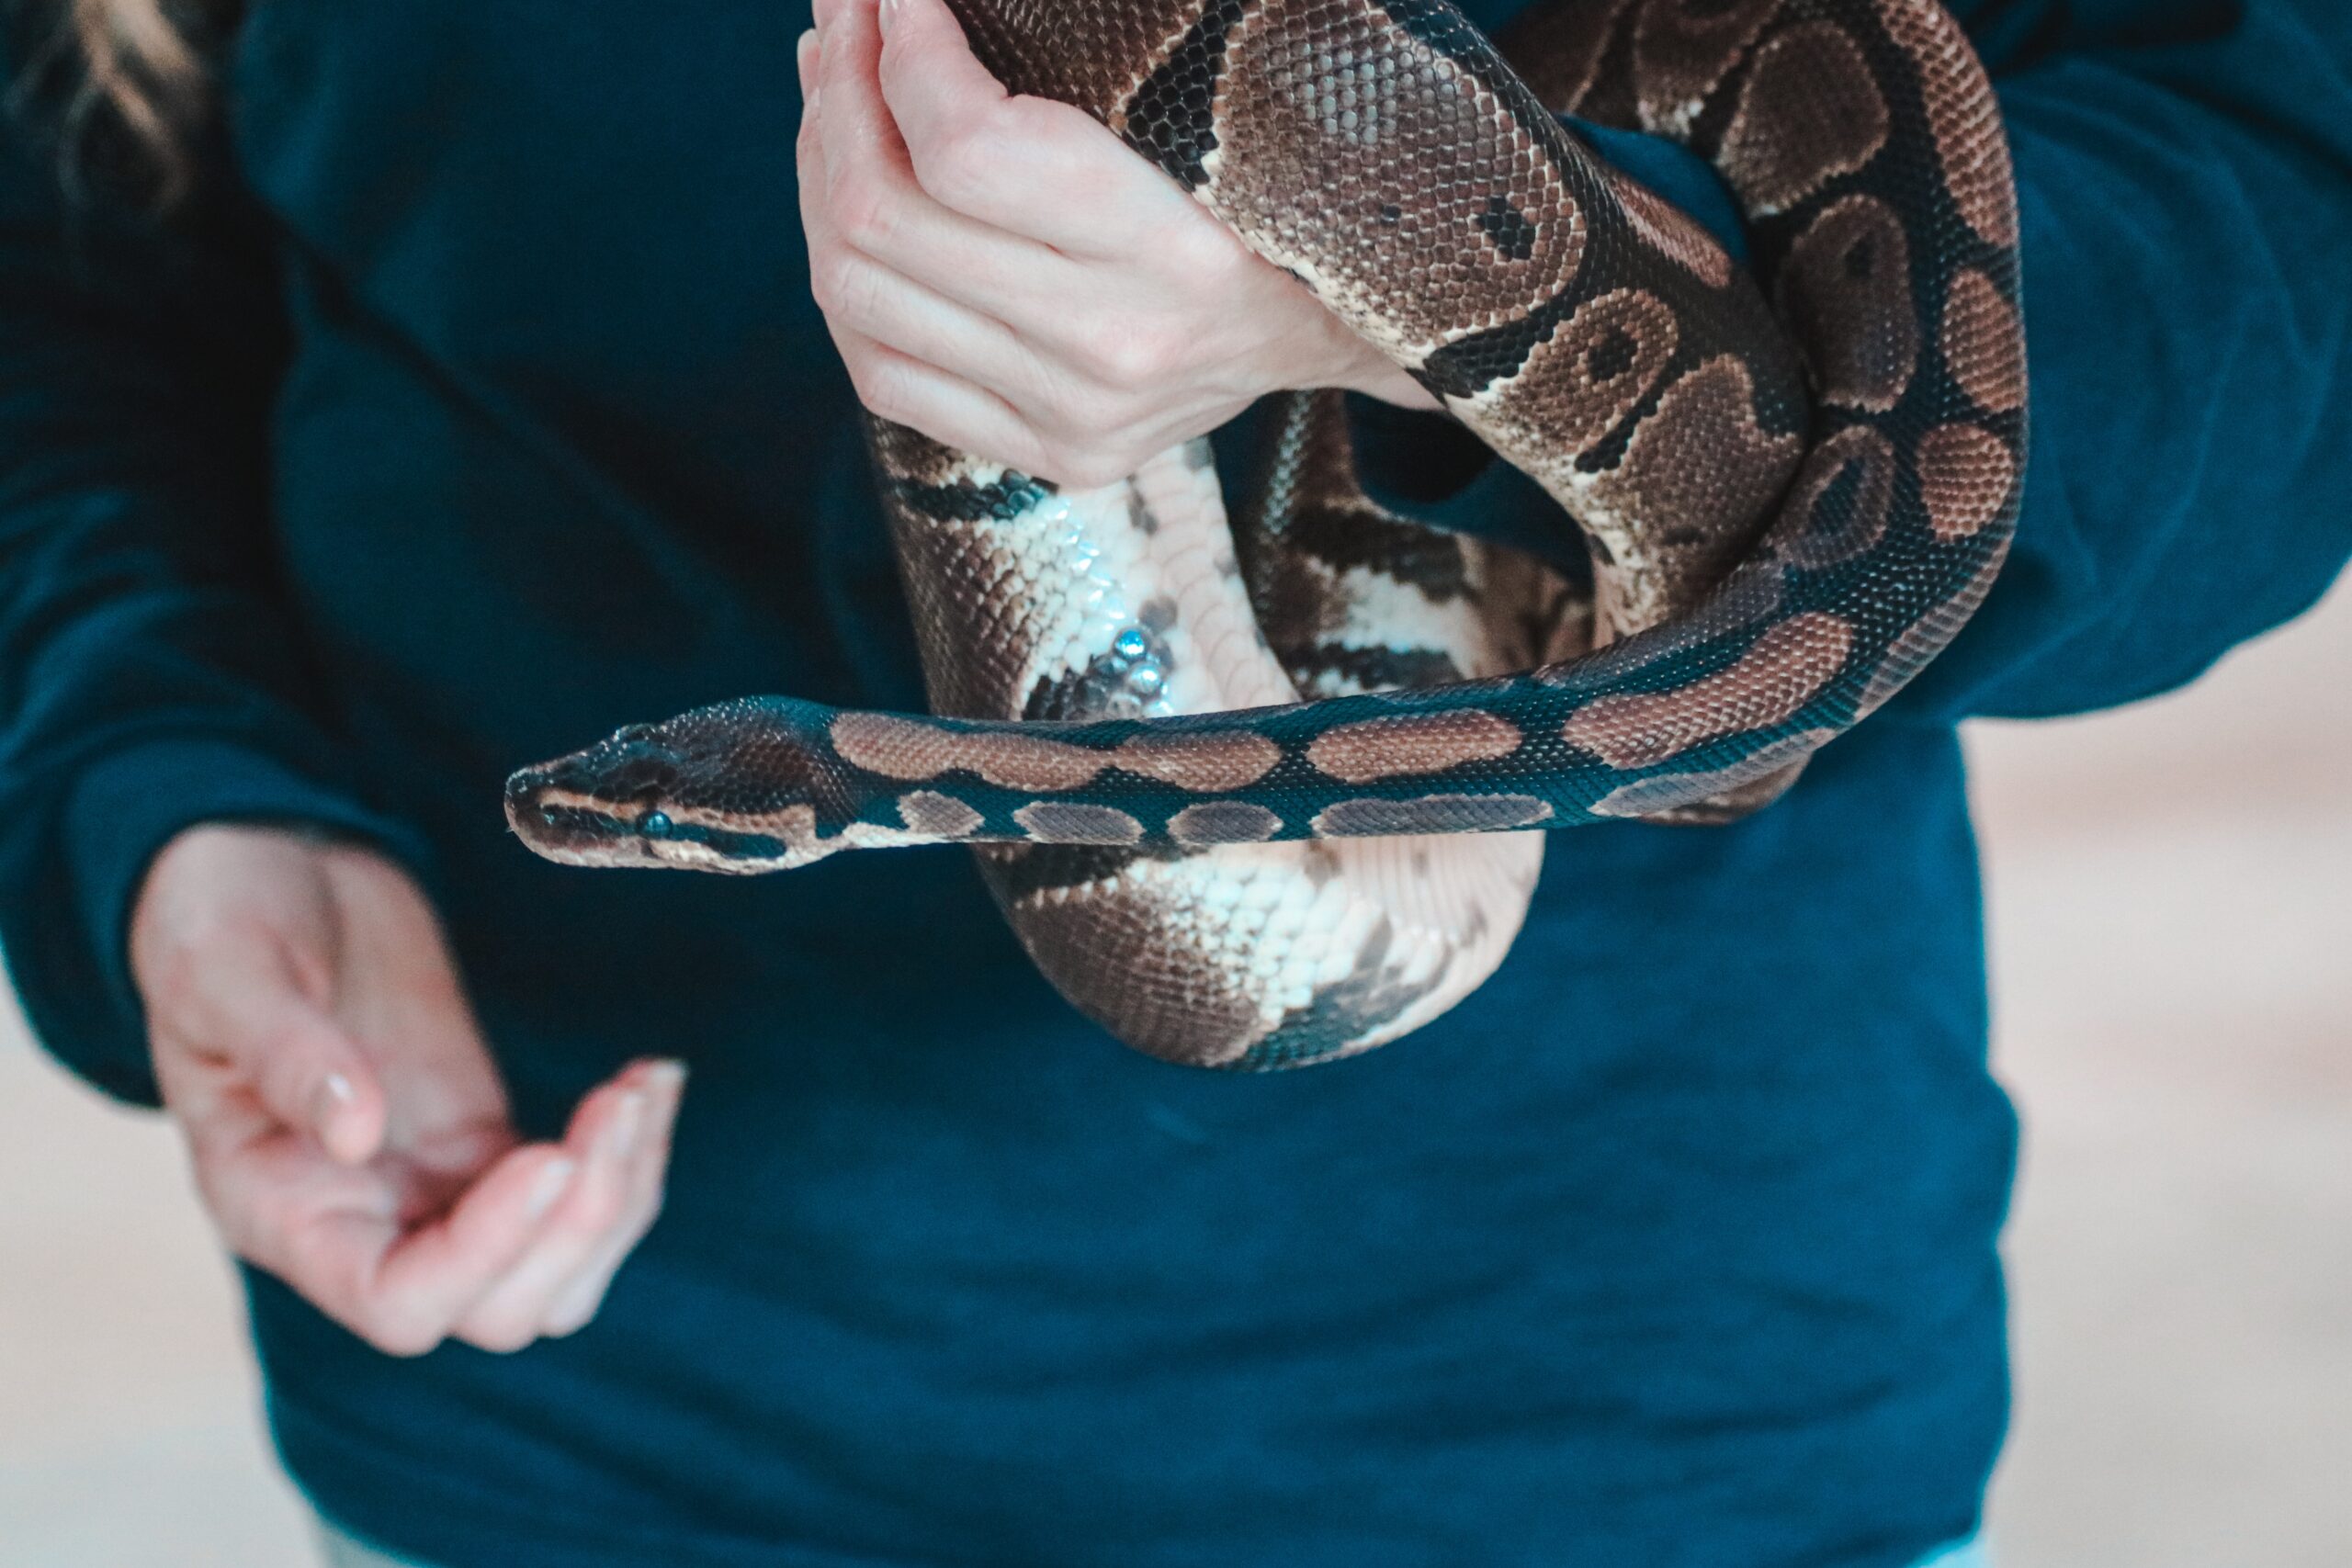 20 Pros and Cons of Snakes as Pets